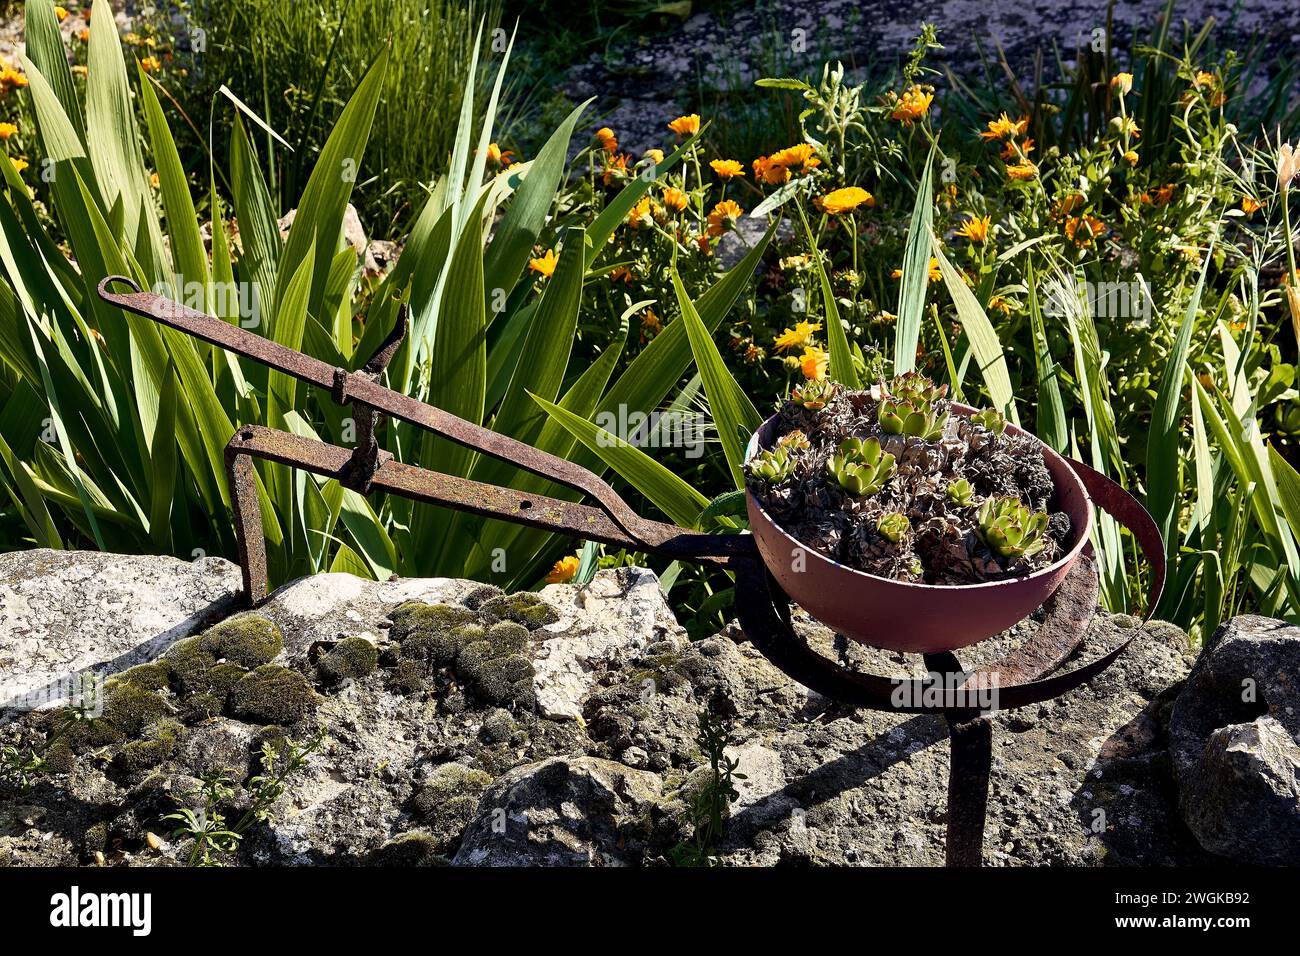 Marigolds (Calendula officinalis), lilies (Iris), cerraja (Sonchus oleraceus) in flower and immortelles (Sempervivum) in the patio of a town house. Stock Photo